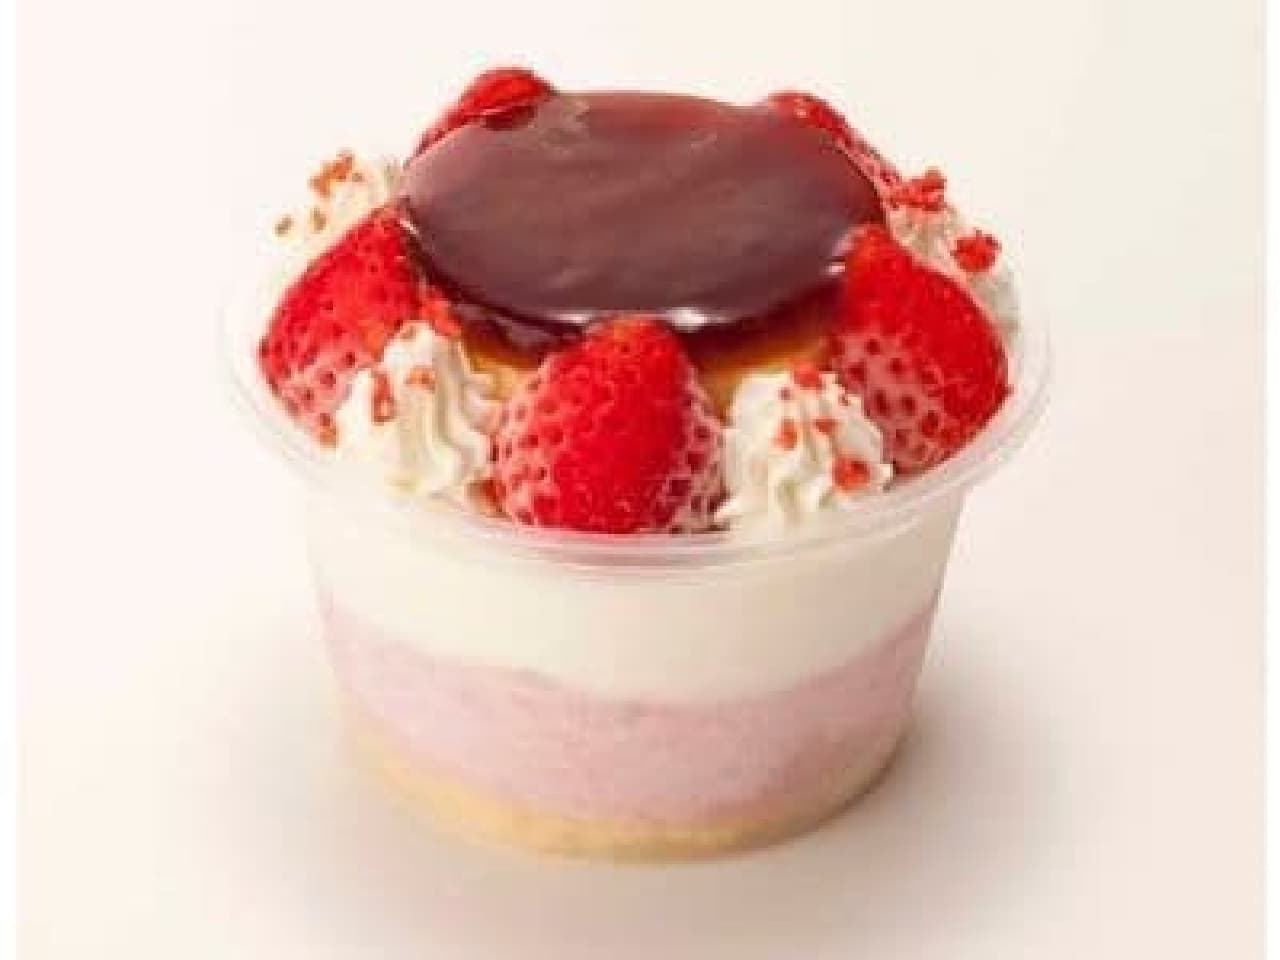 "Strawberry pudding a la mode" stood at the top of 13,611 mails-Chateraise dream ice cream project